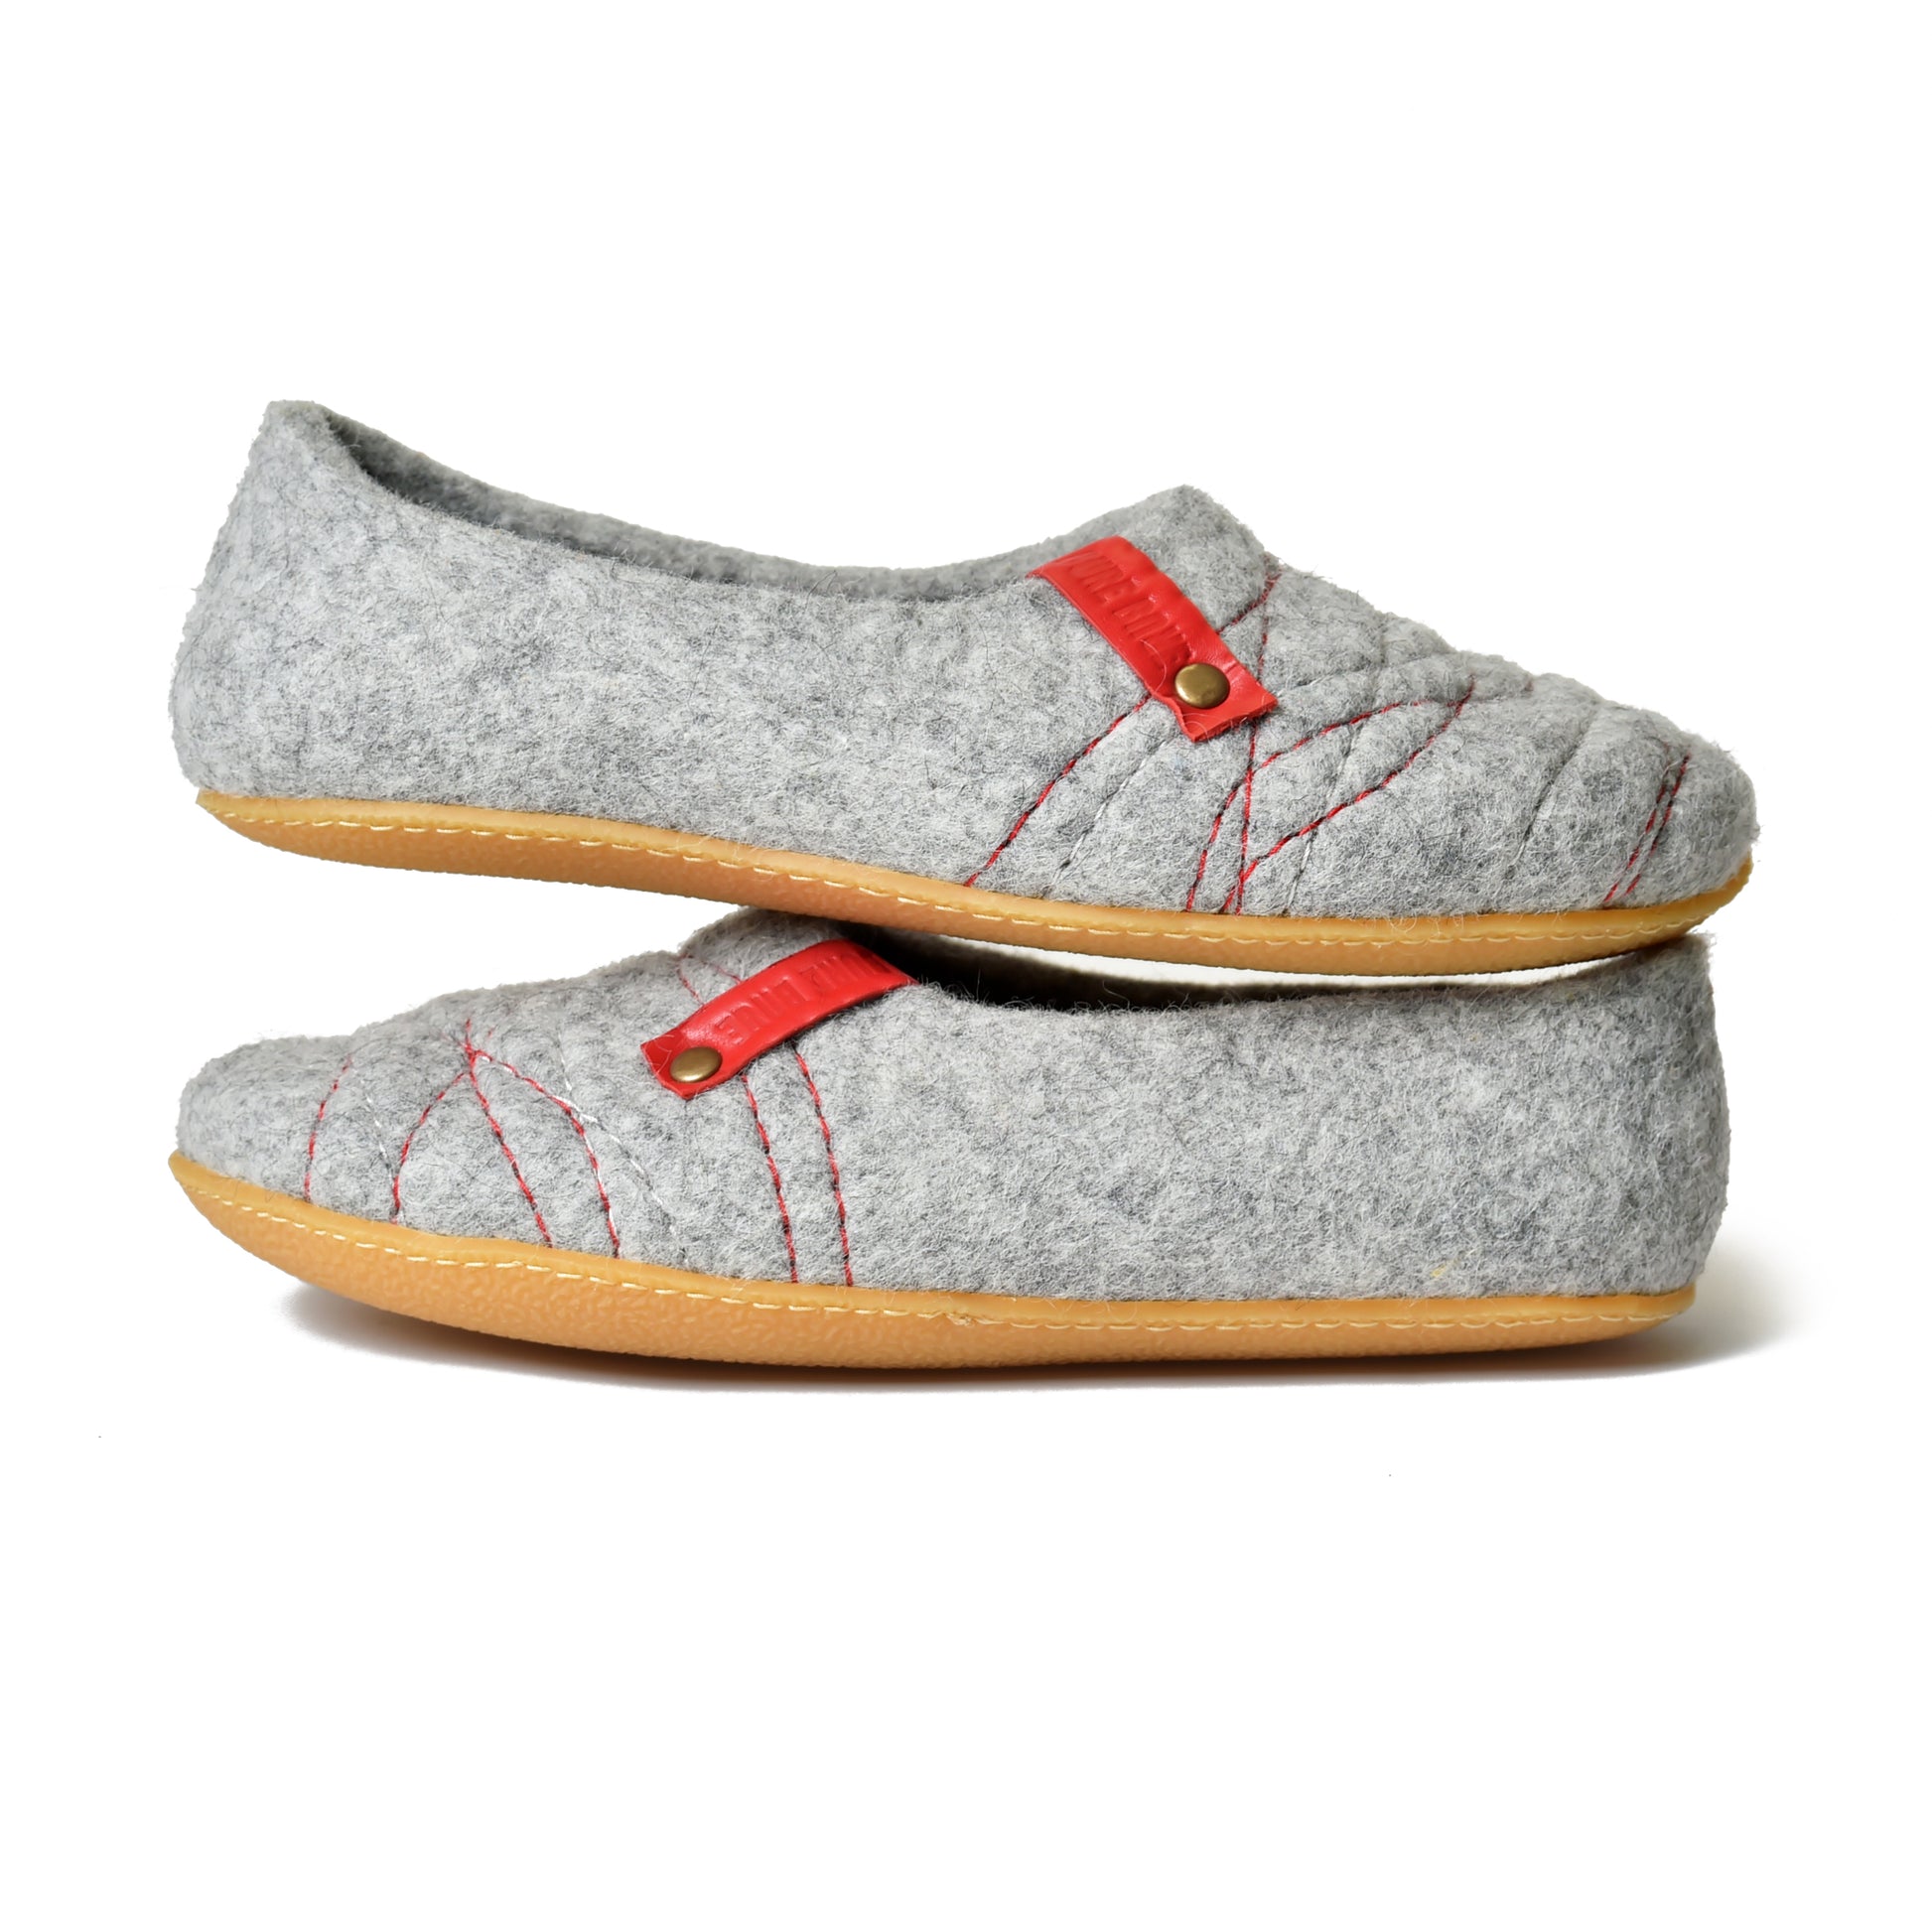 Warm Woolen Slippers for Women from BureBure Cocoon Collection,  Handmade Felted Wool, Recycled Leather, Red Stitches